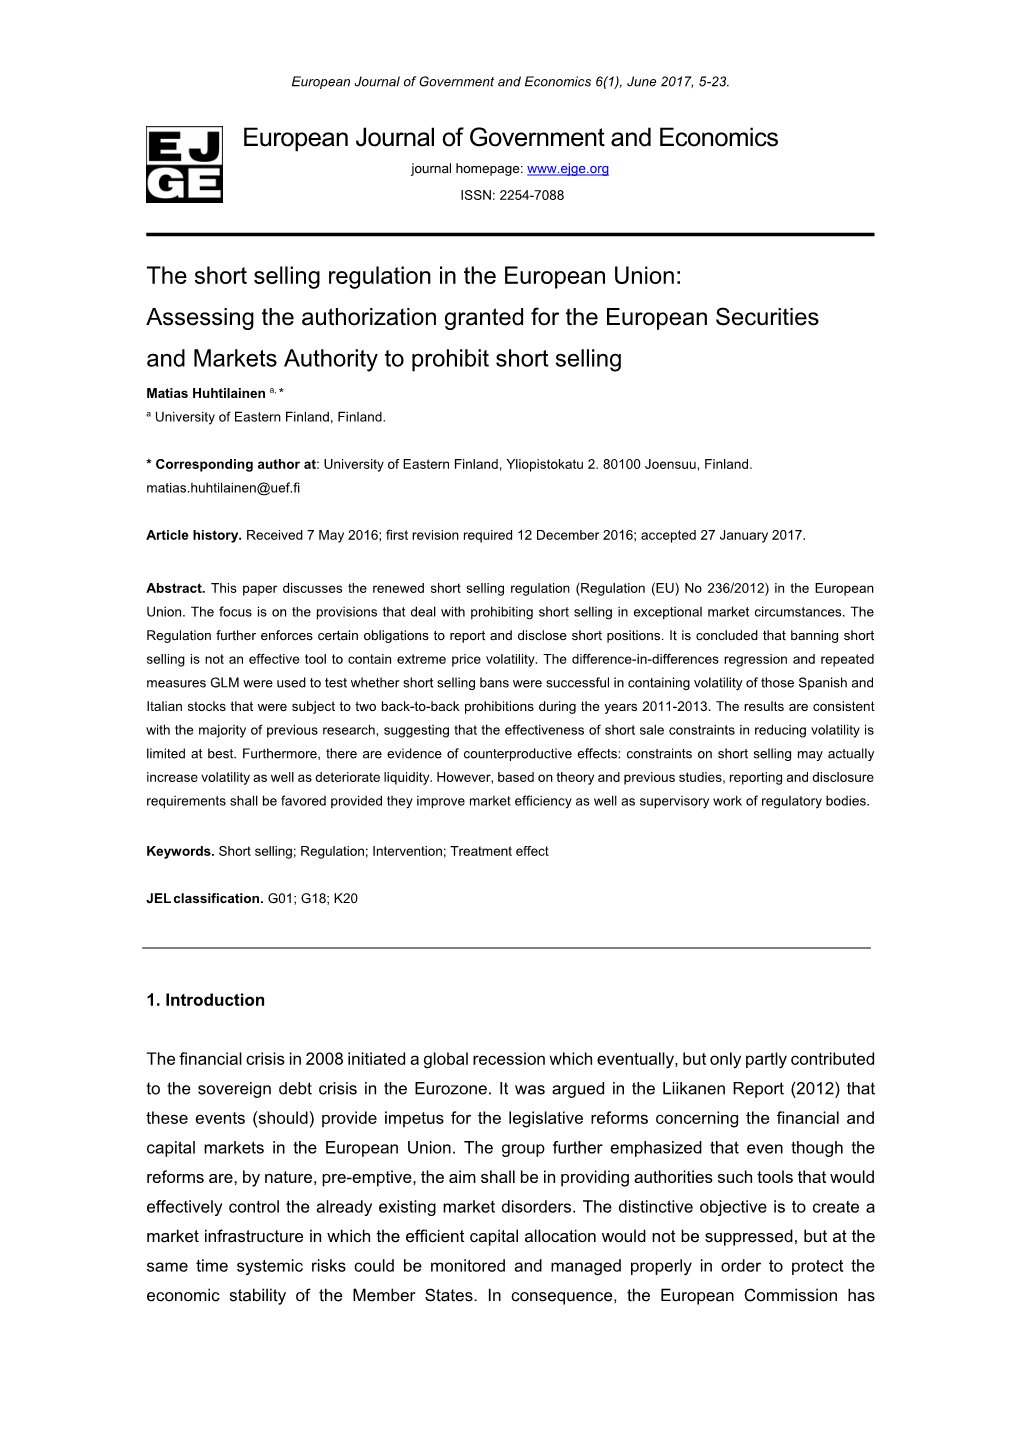 The Short Selling Regulation in the European Union: Assessing the Authorization Granted for the European Securities and Markets Authority to Prohibit Short Selling